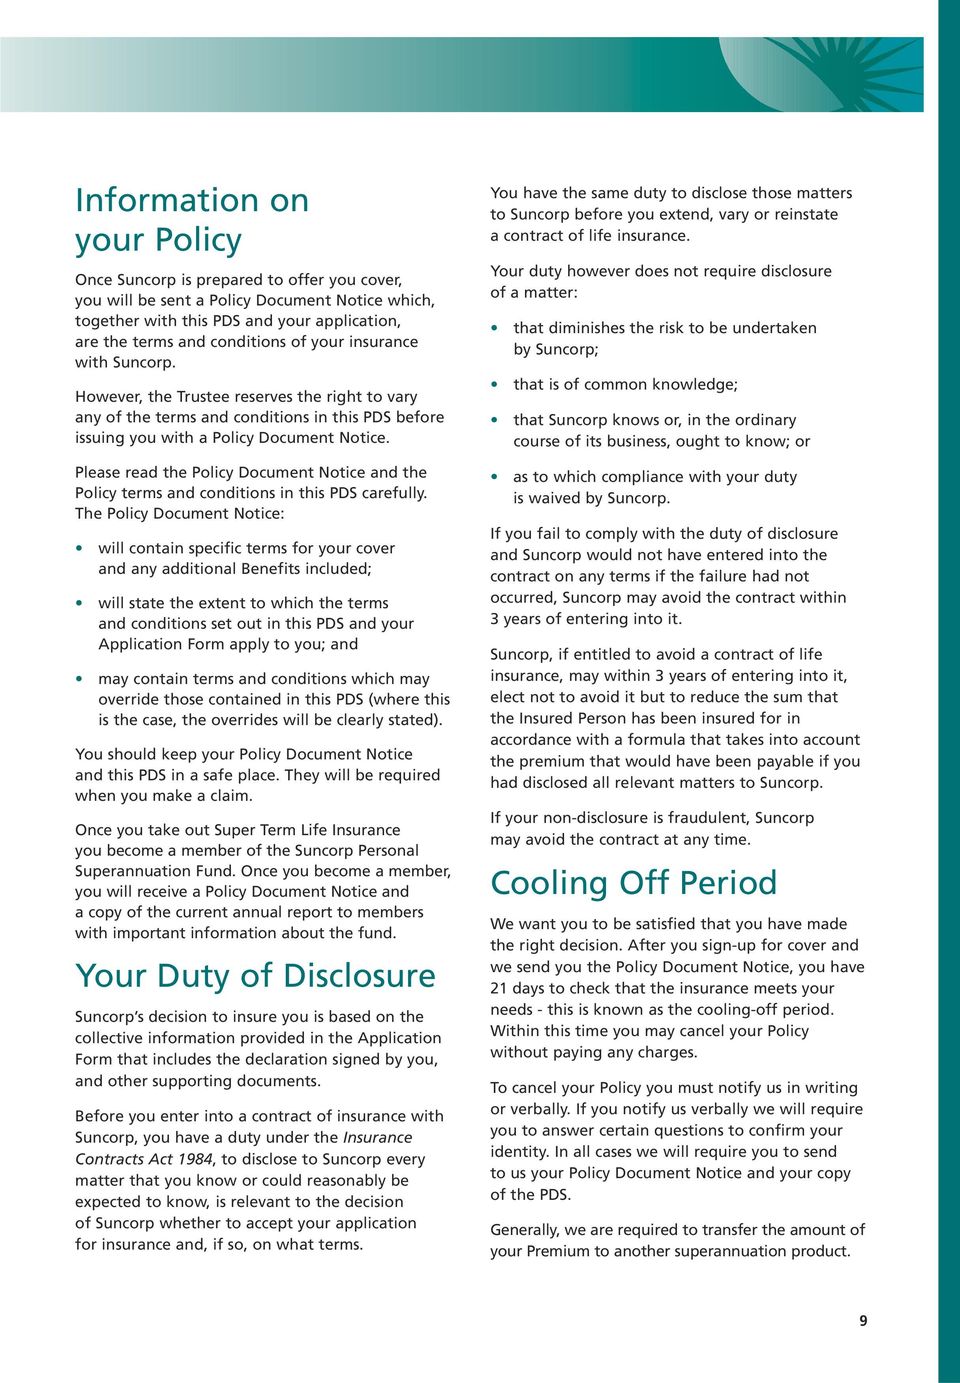 Please read the Policy Document Notice and the Policy terms and conditions in this PDS carefully.